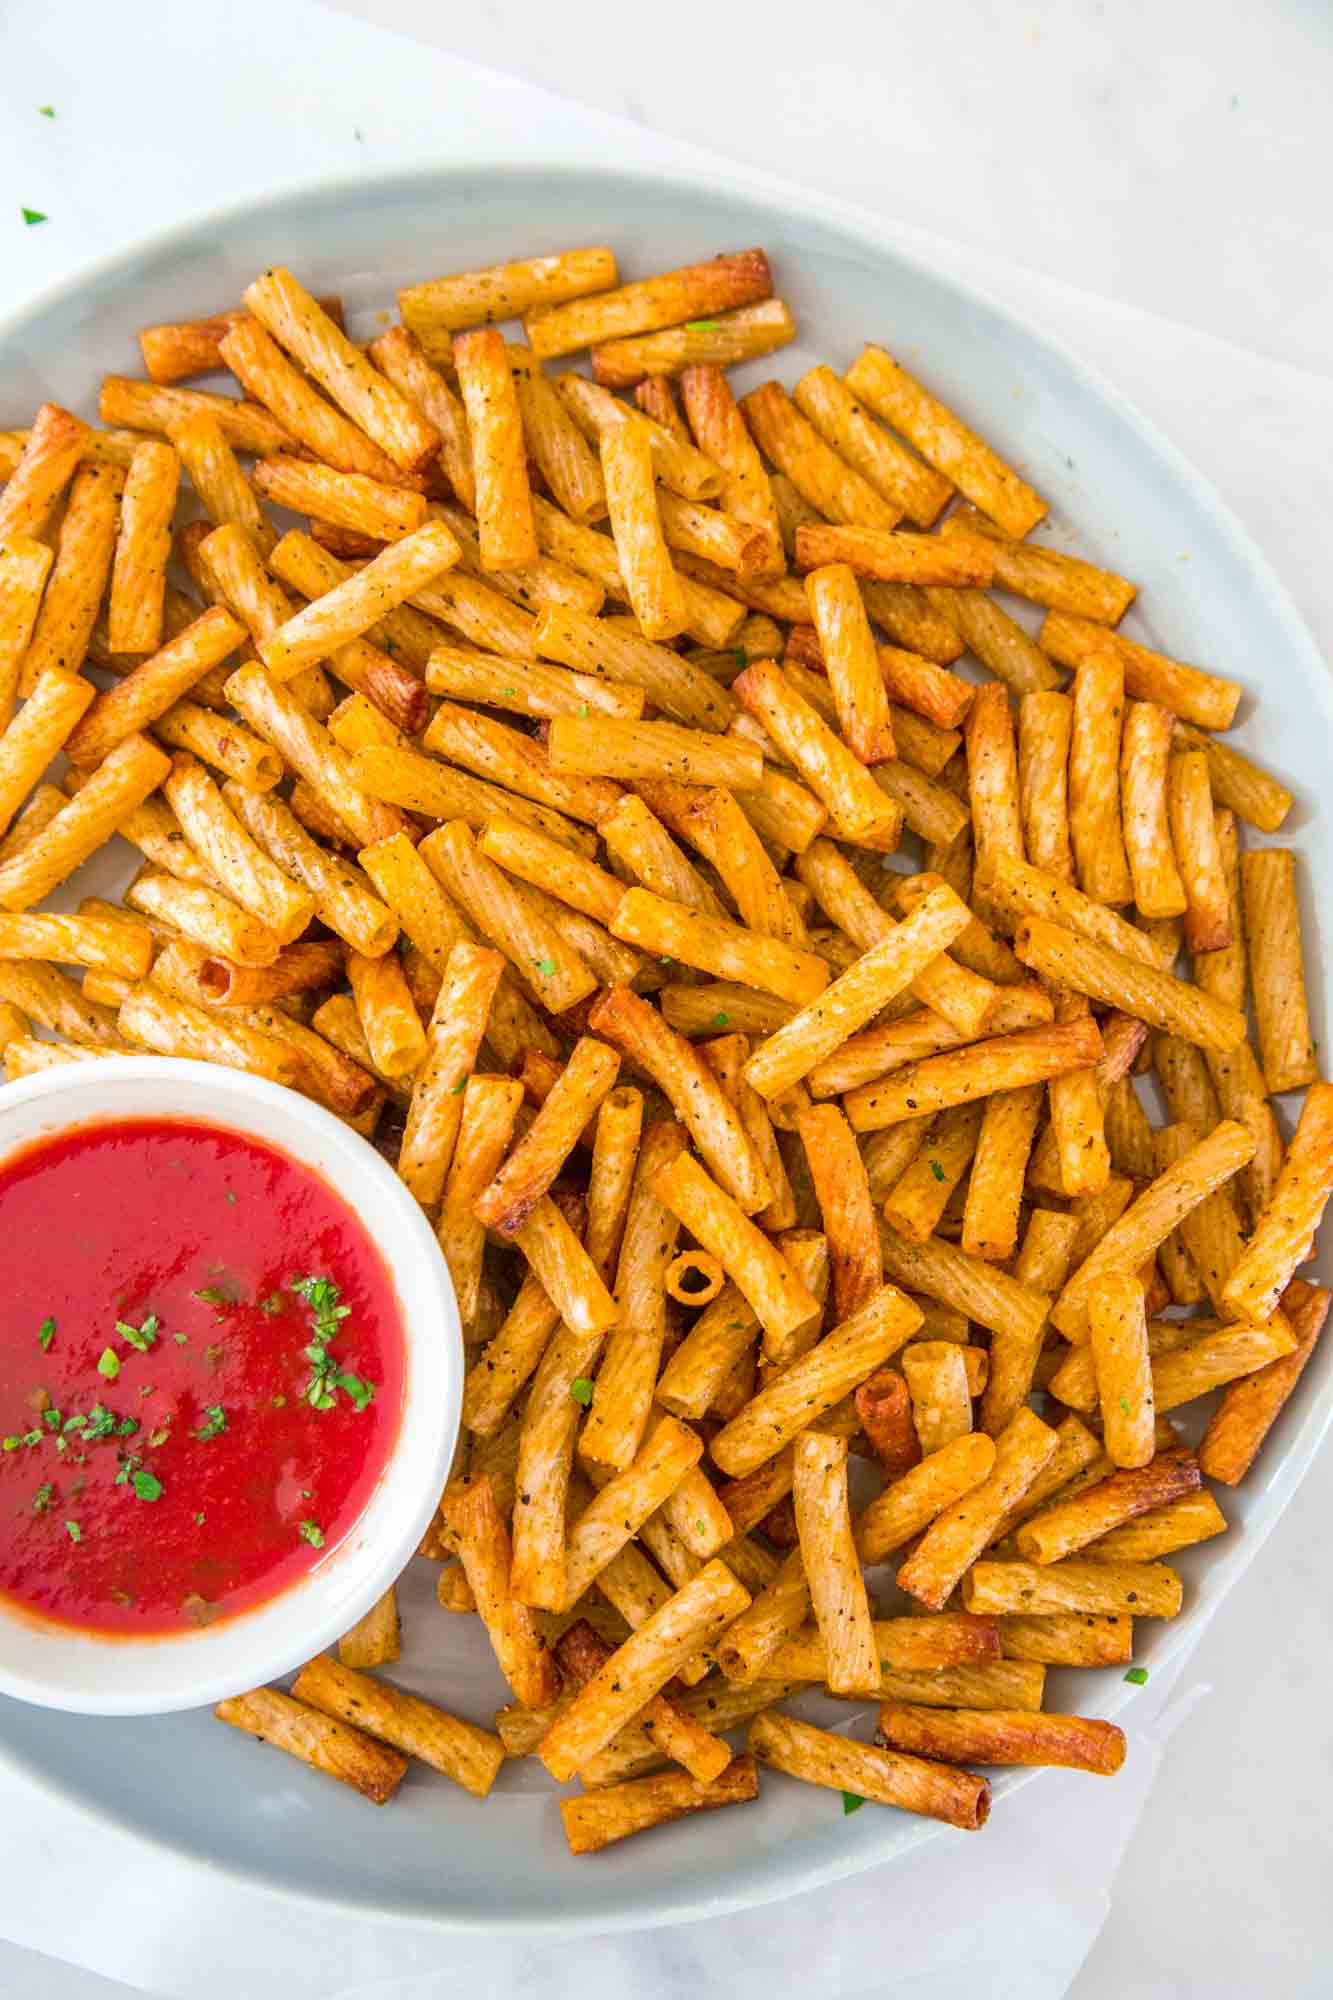 Pasta chips served on a large plate, with a tomato dip on the side.